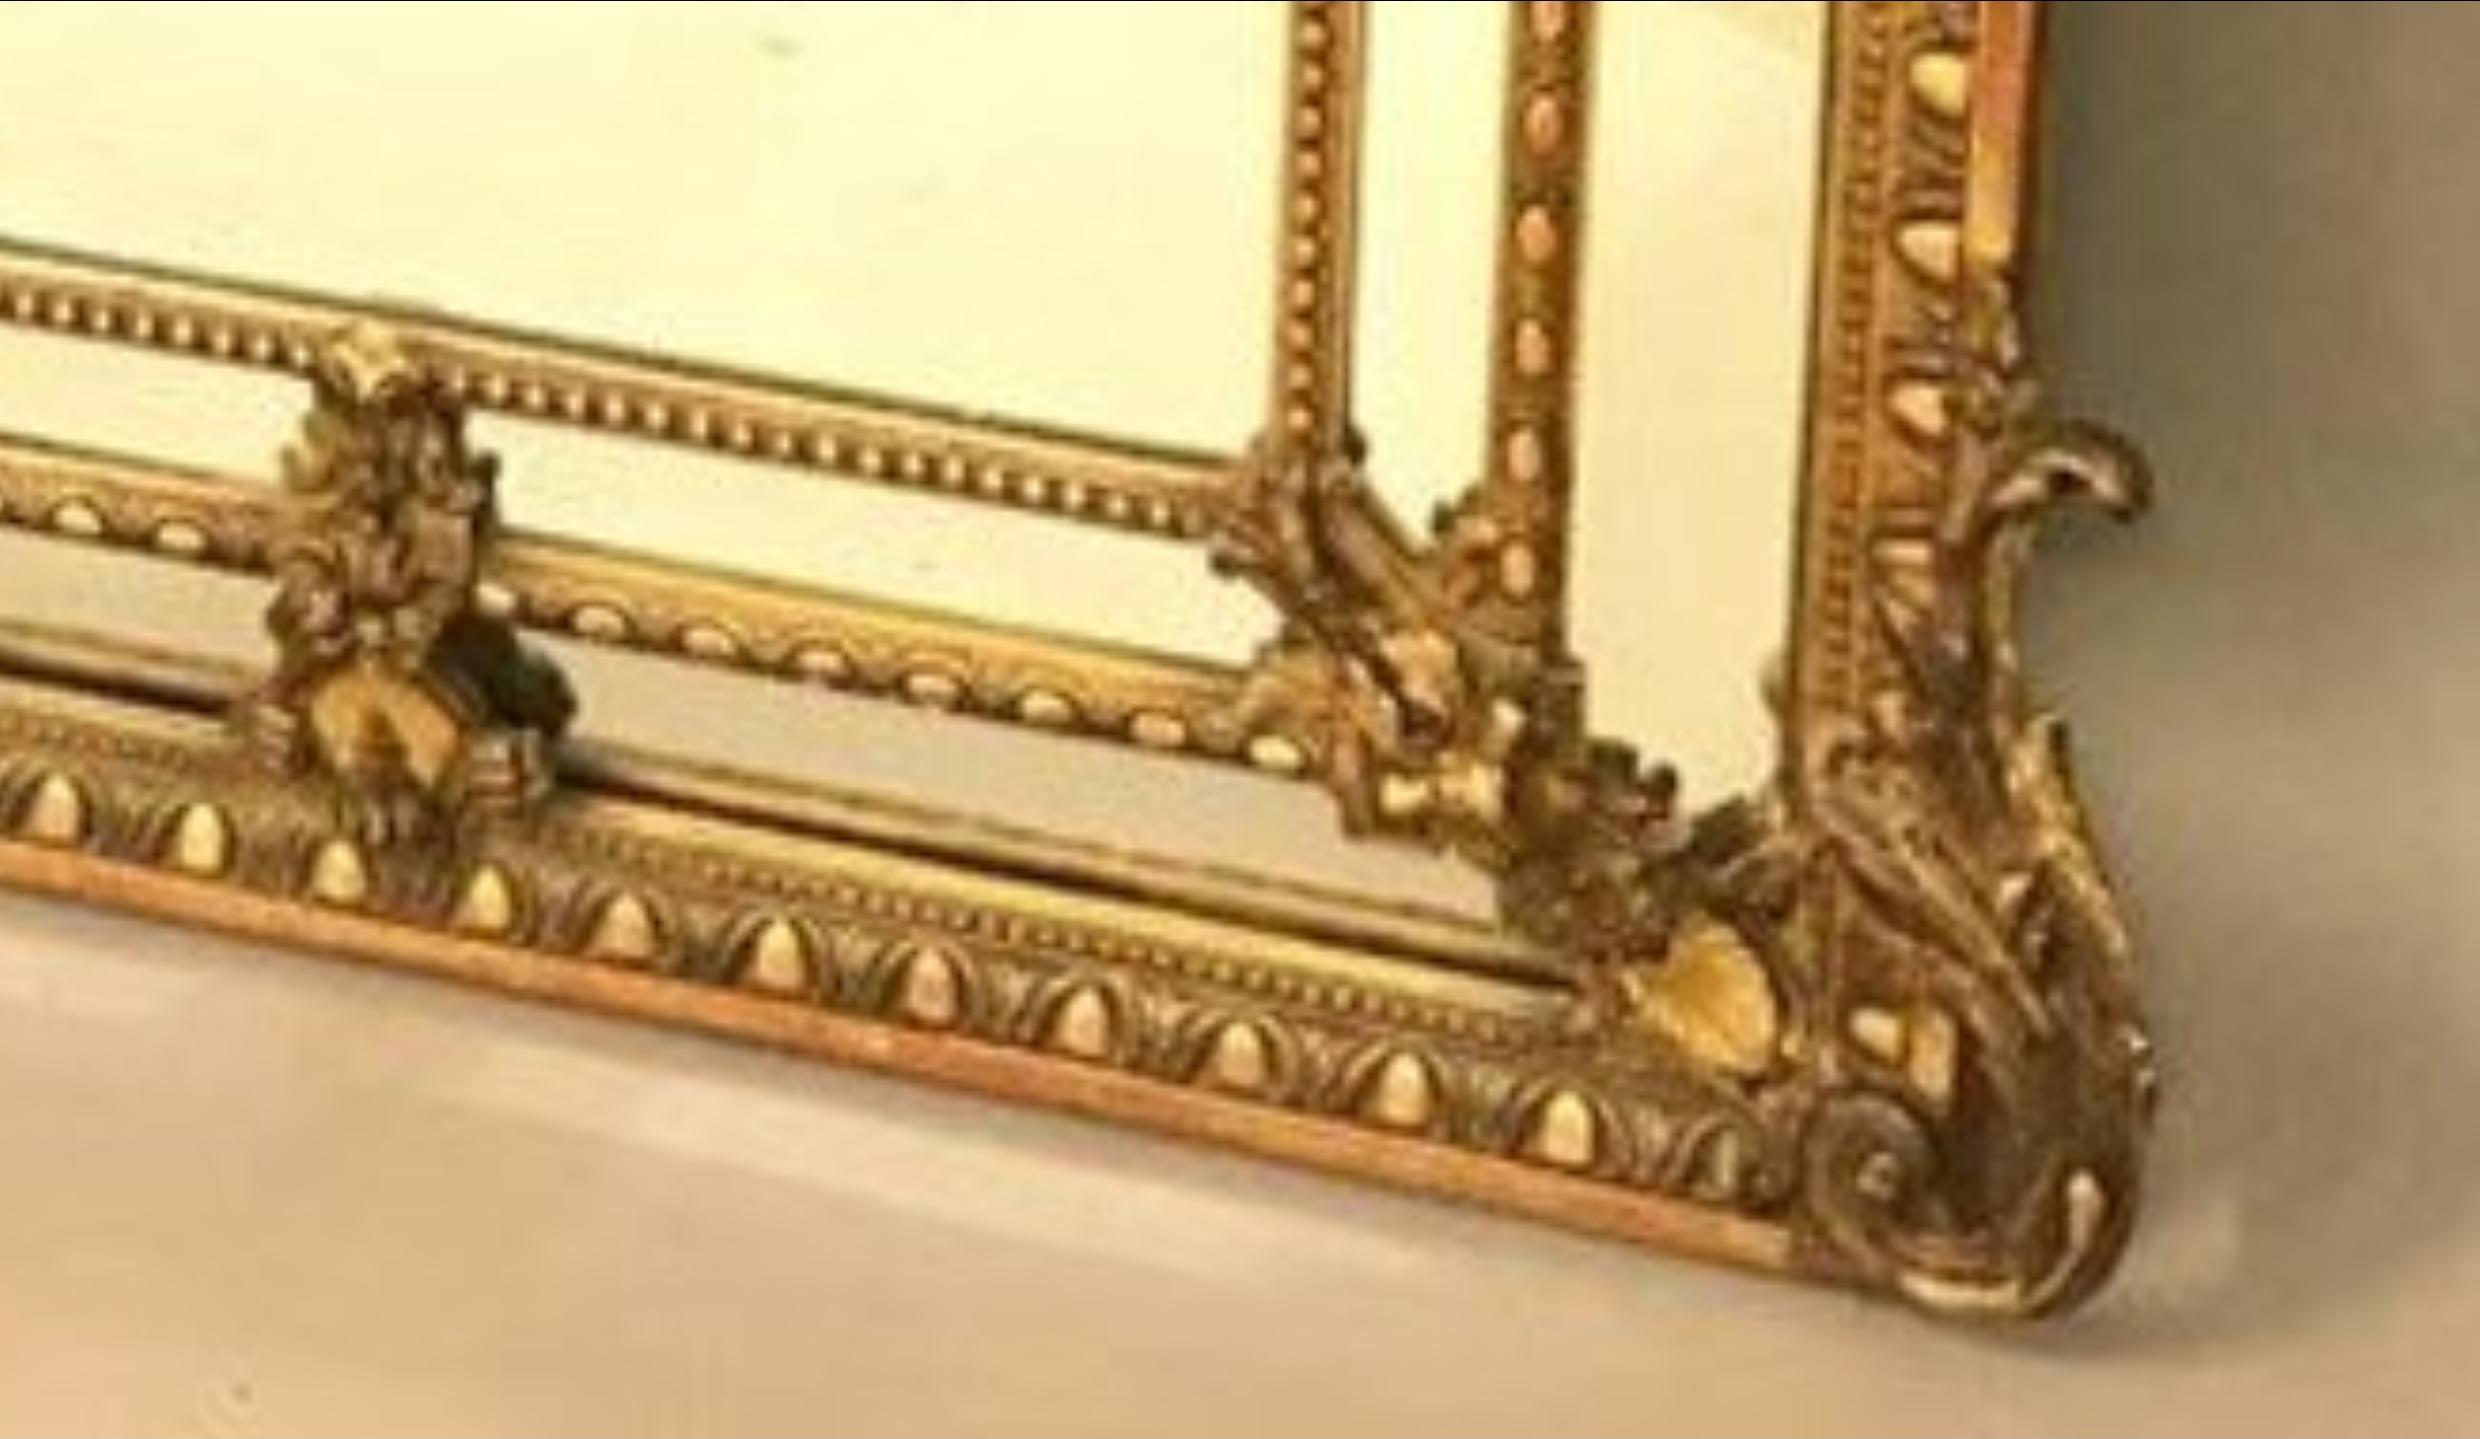 Extremely elegant Napoleon III large giltwood and stucco mirror.
France, 19th century, totally restored by our specialists, in a very good general condition.